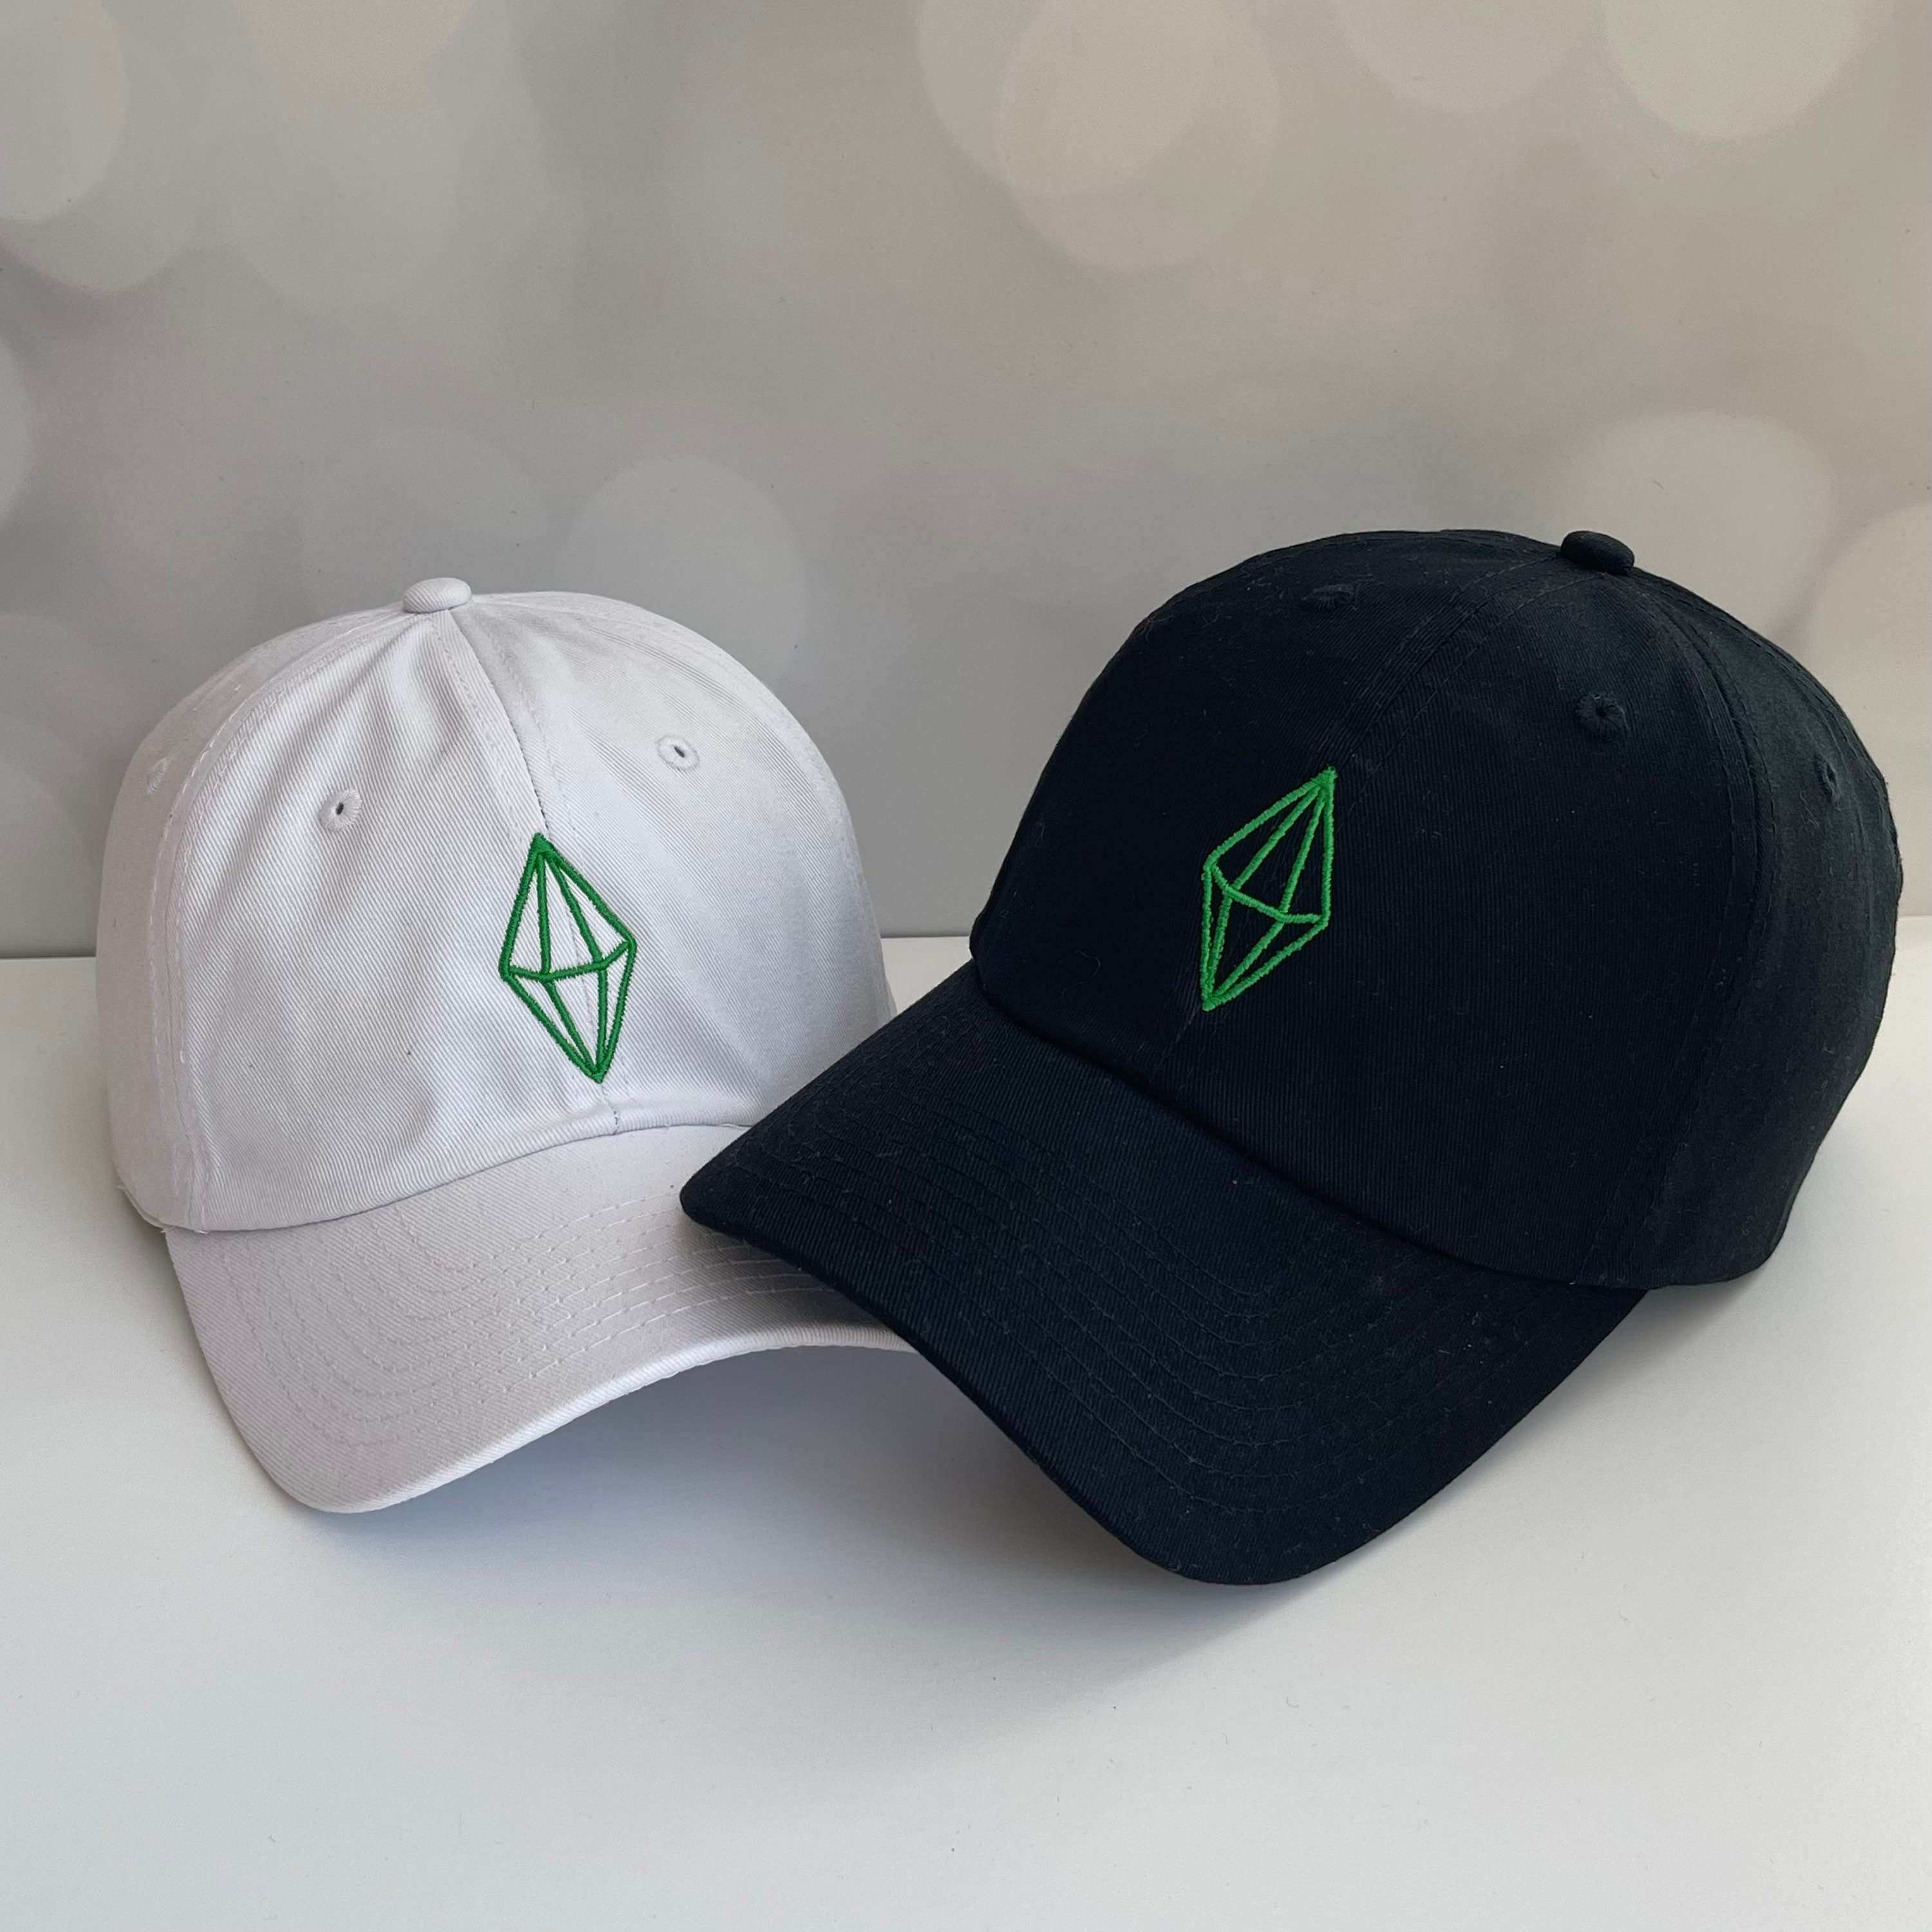 The Sims Hat -  Canada